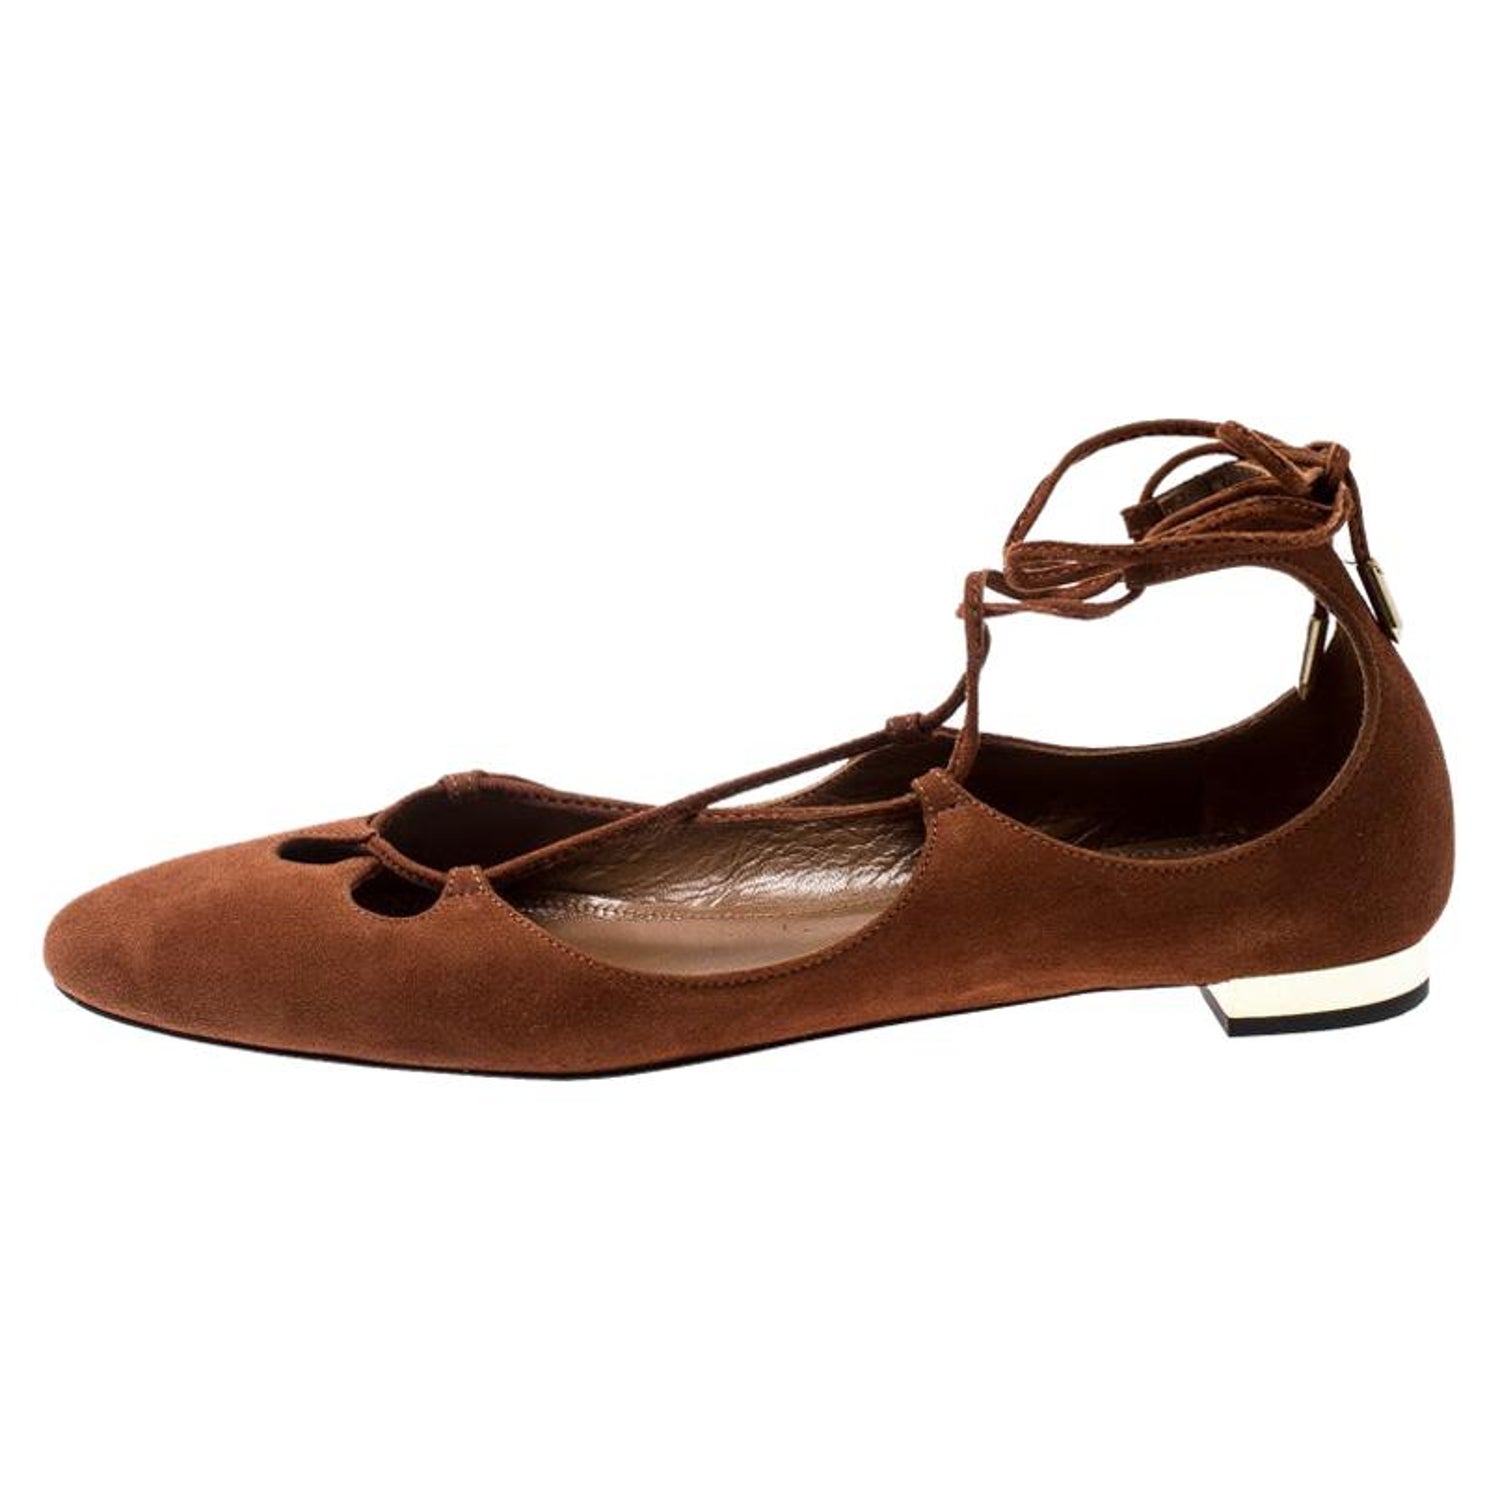 Aquazzura Brown Suede Dancer Lace Up Ballet Flats Size 38 5 For Sale At 1stdibs